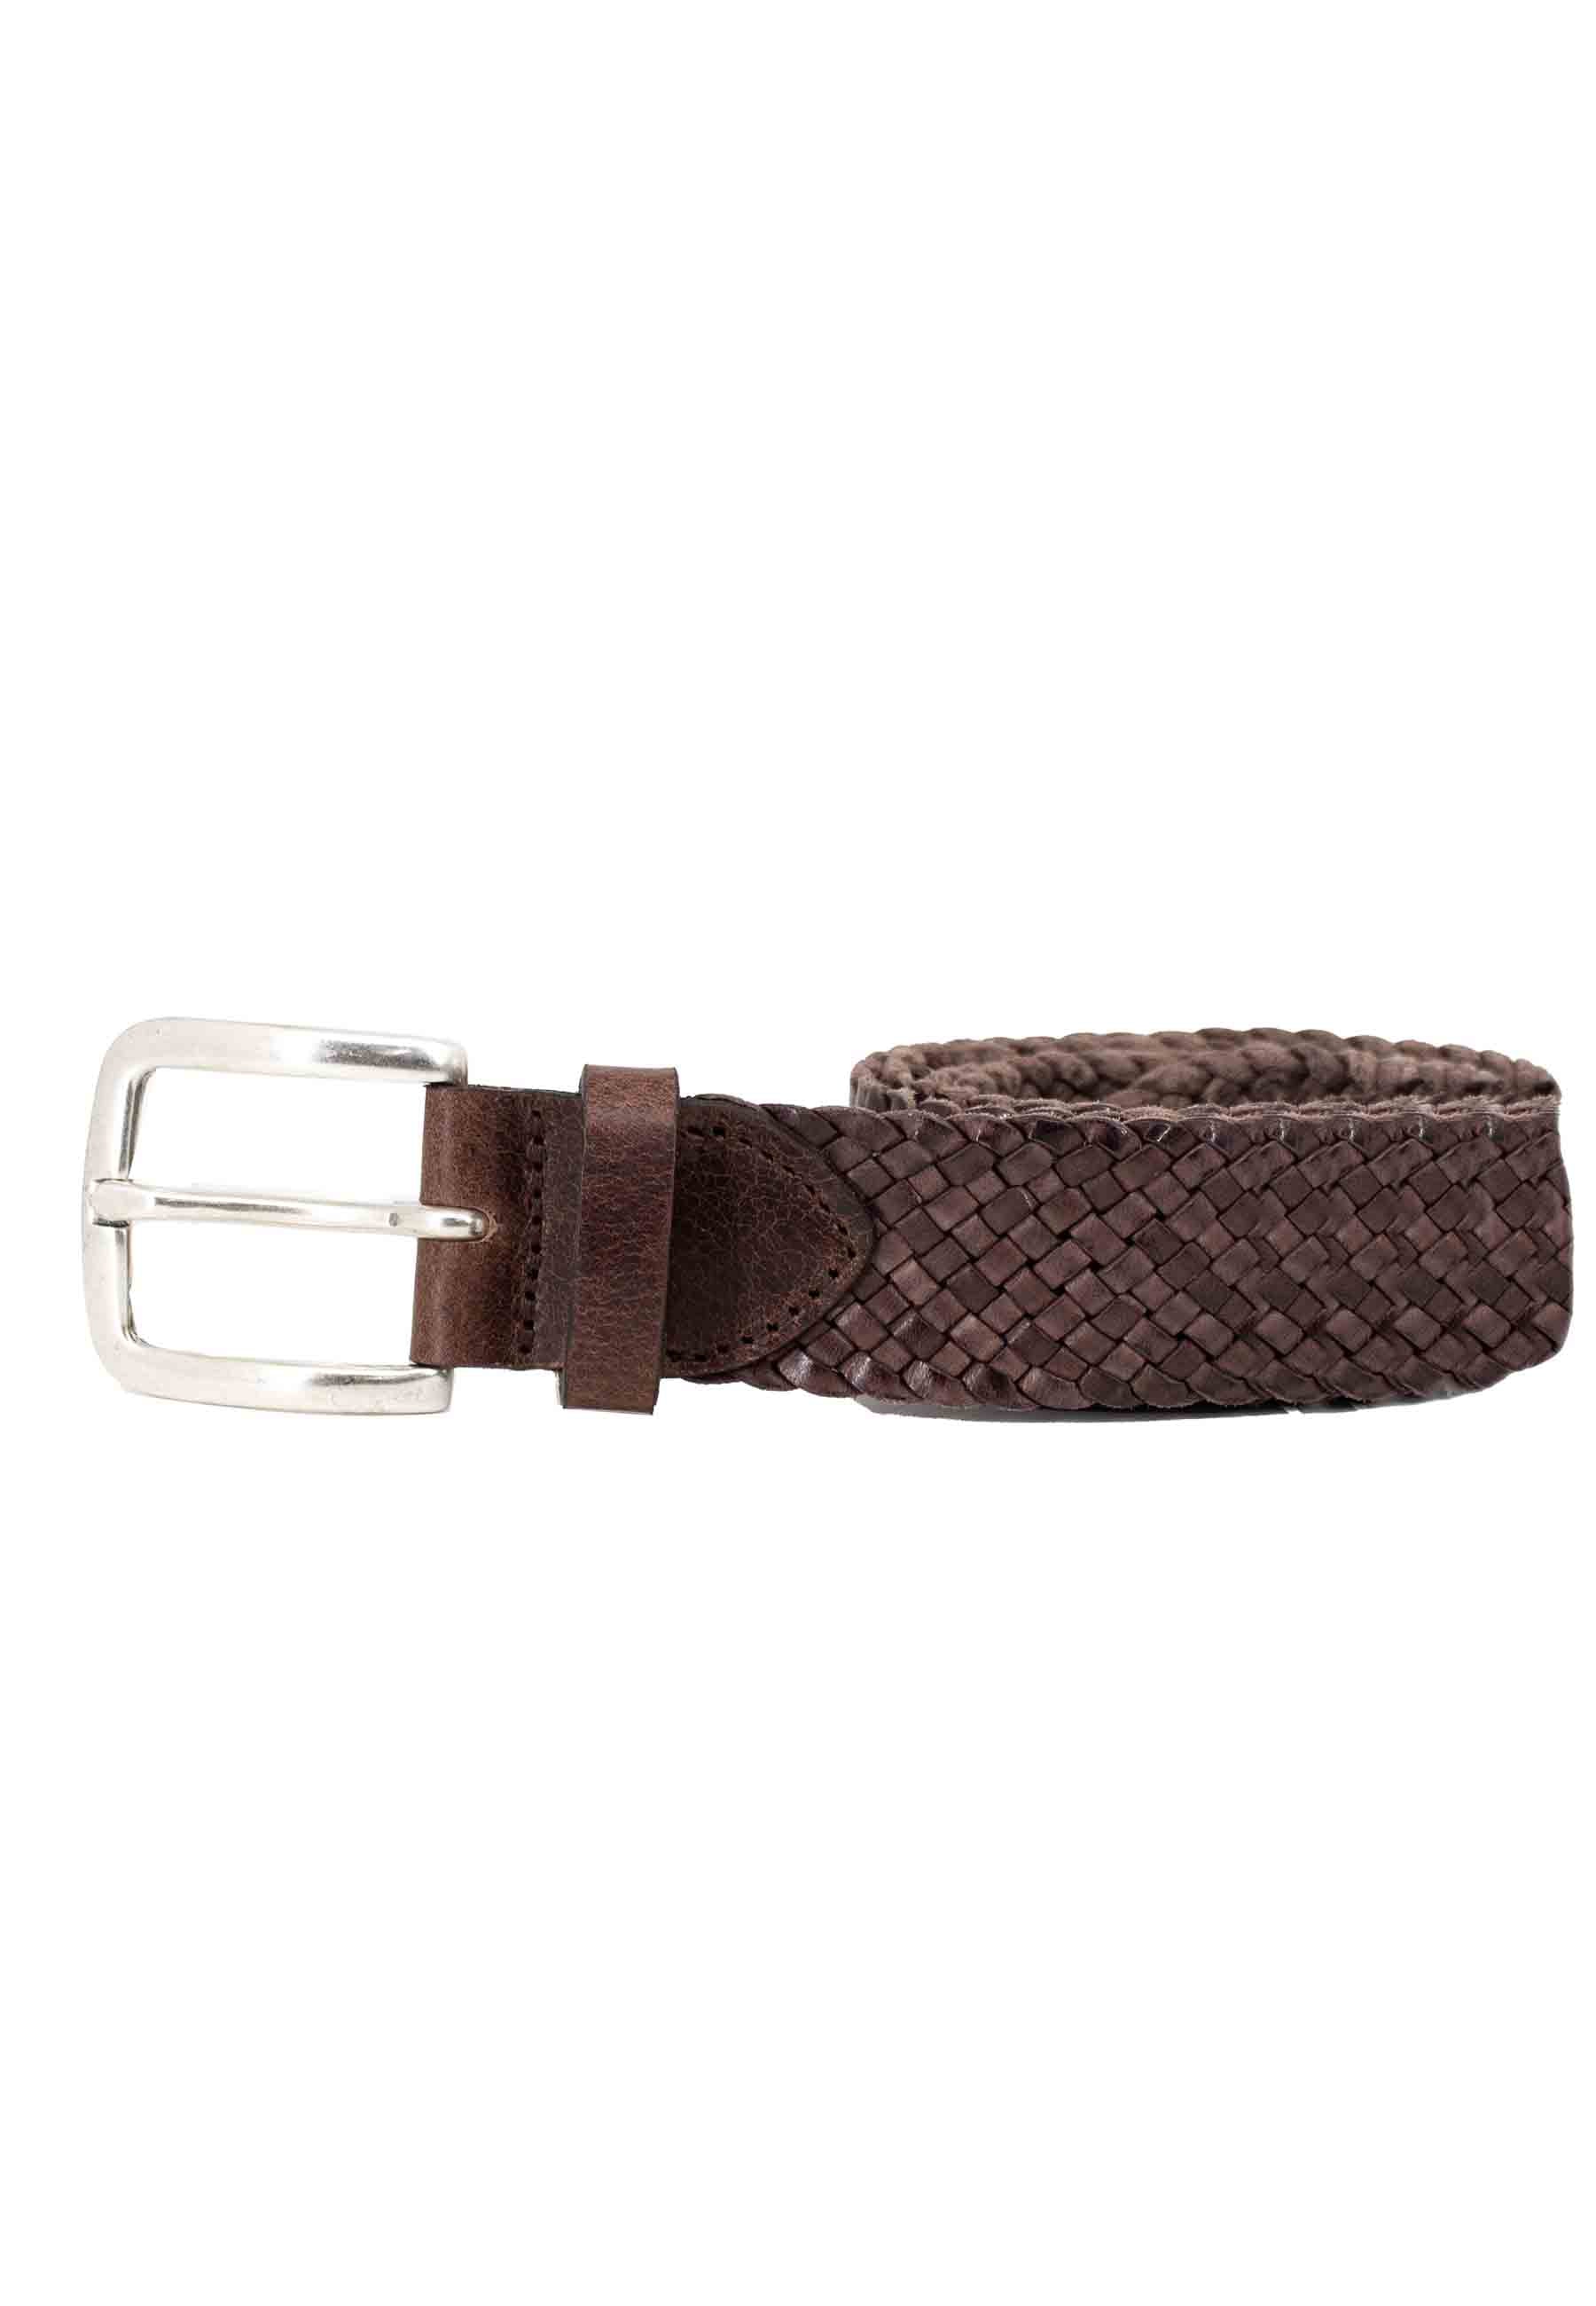 Men's belt in dark brown woven leather with silver buckle